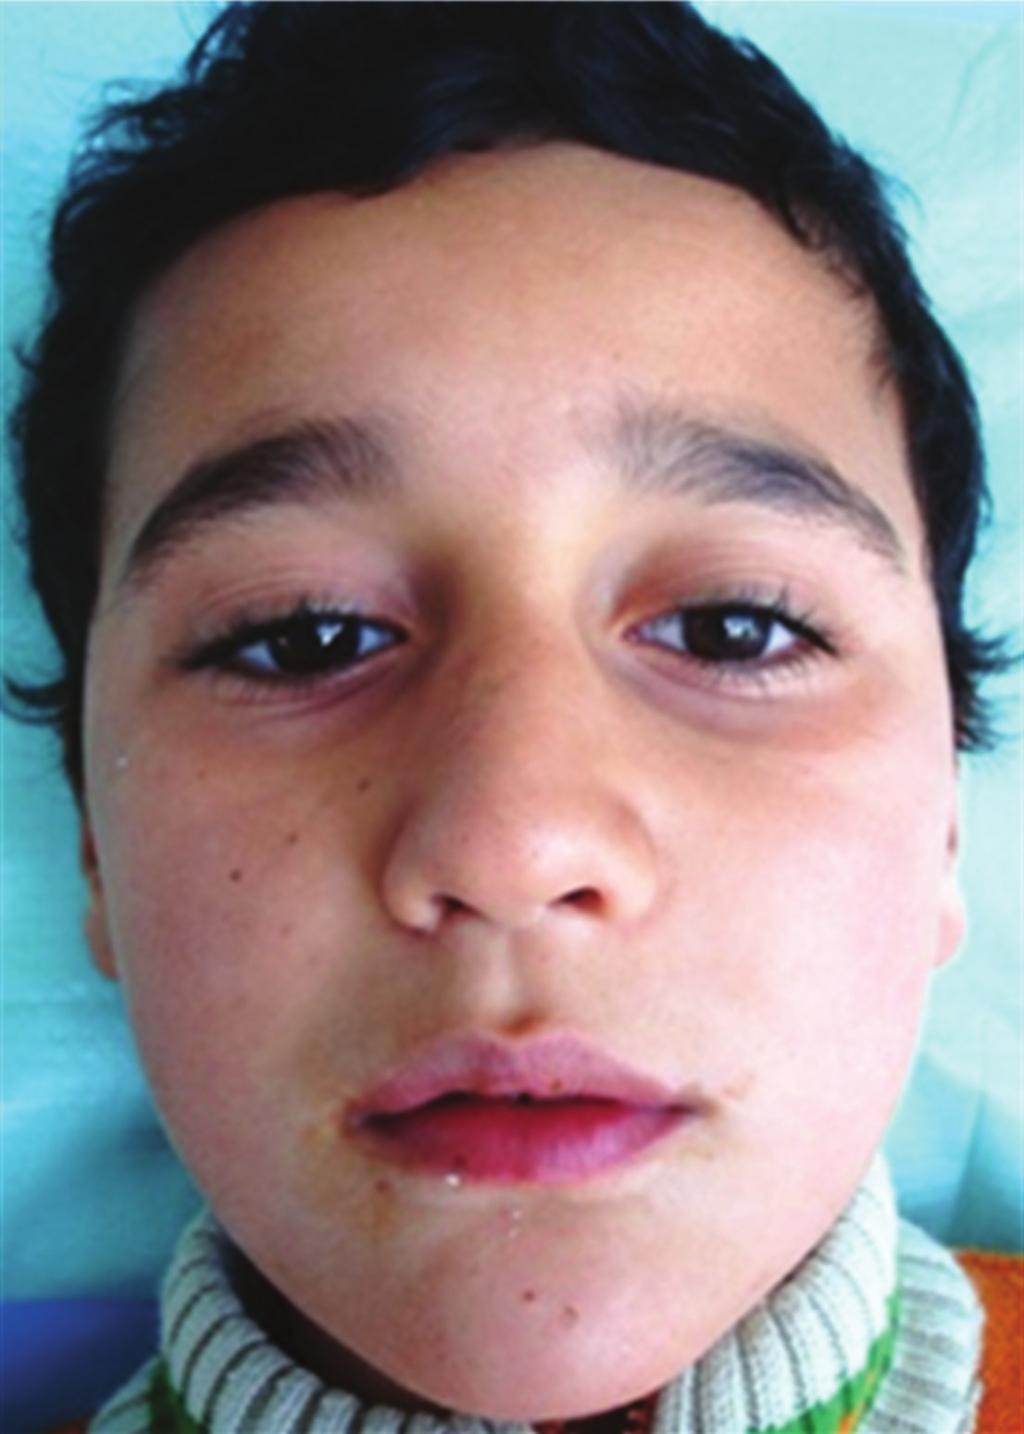 Case Reports in Dentistry 5 (a) (b) Figure 13: Postoperative frontal view and lateral view after 2 years. 5. Conclusion Our patient presented with a painless left facial swelling.